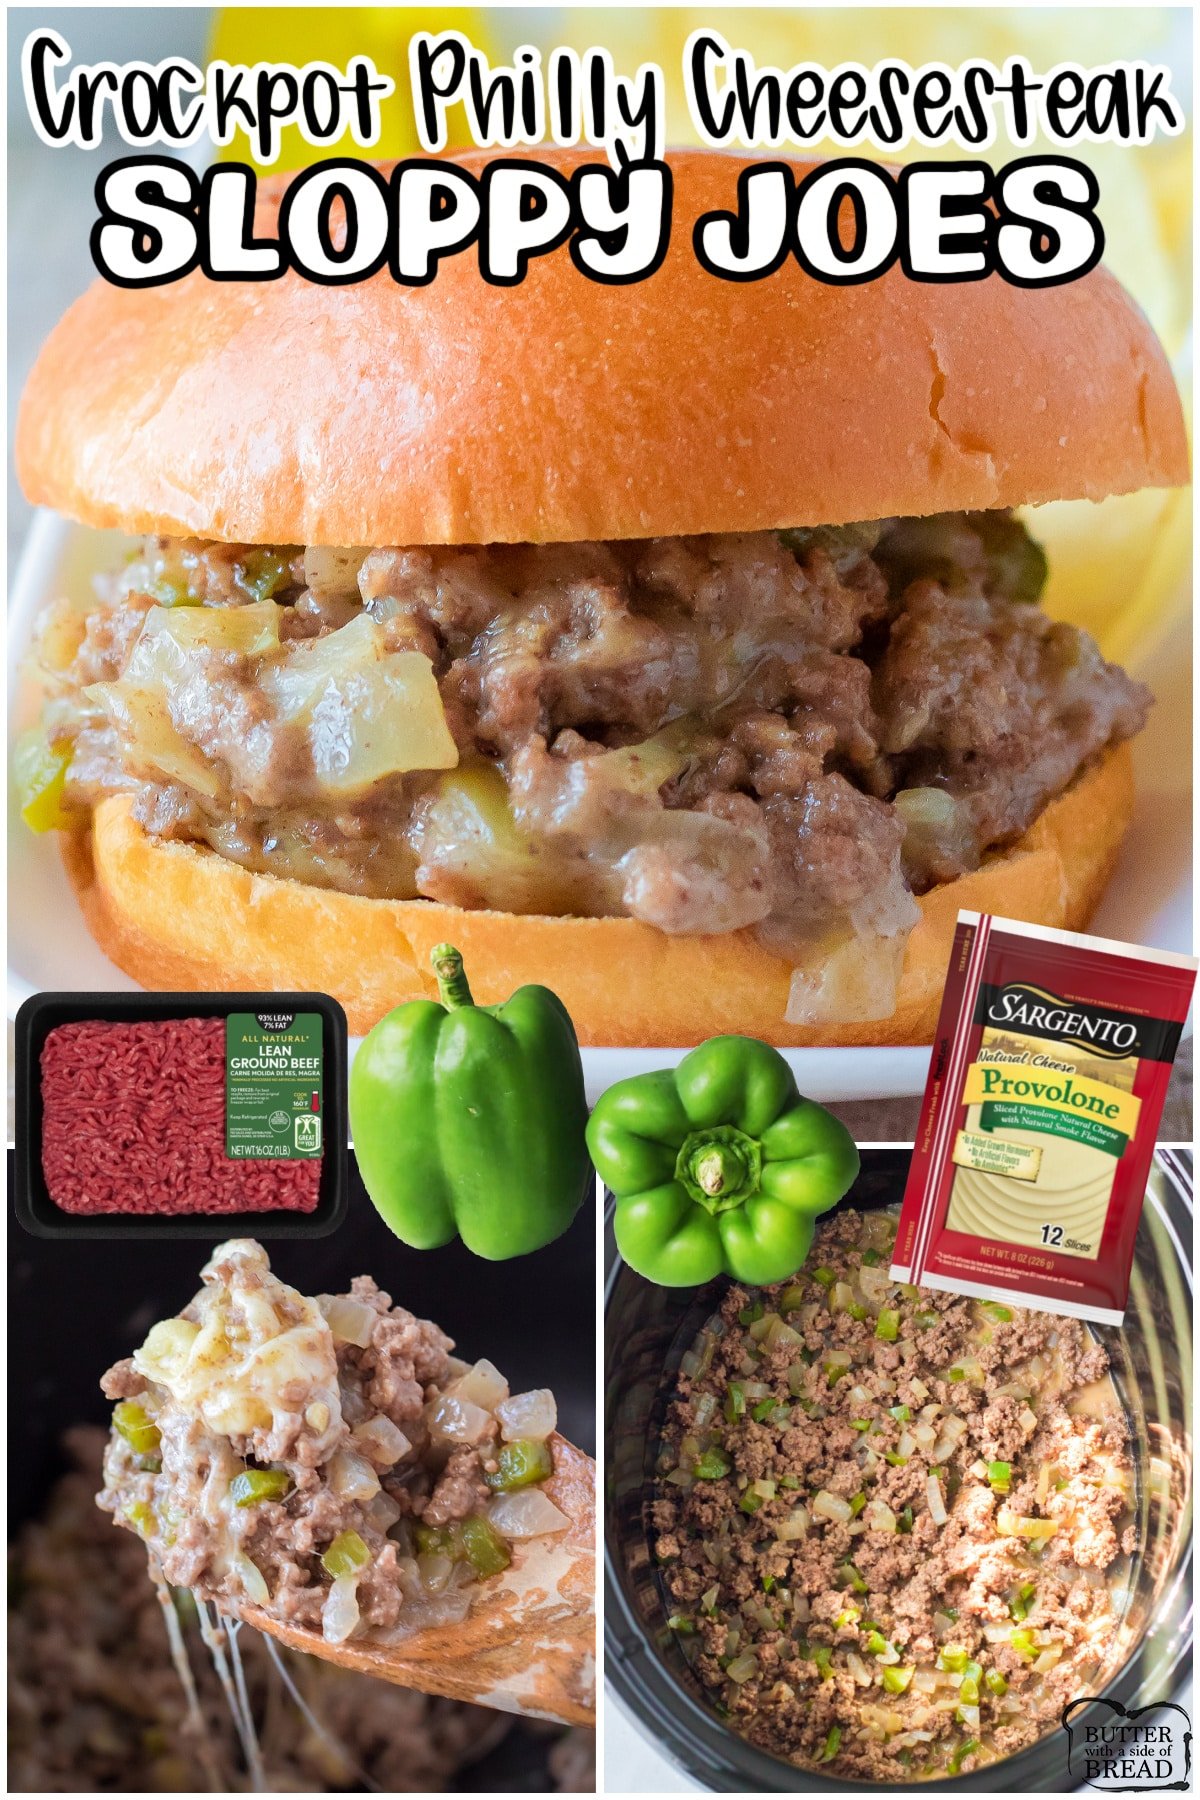 Slow Cooker Philly Cheesesteak Sloppy Joes are an epic mashup of two classic recipes! These philly cheesesteak sloppy joes are simple to make, loaded with gooey cheese, & have amazing flavor!